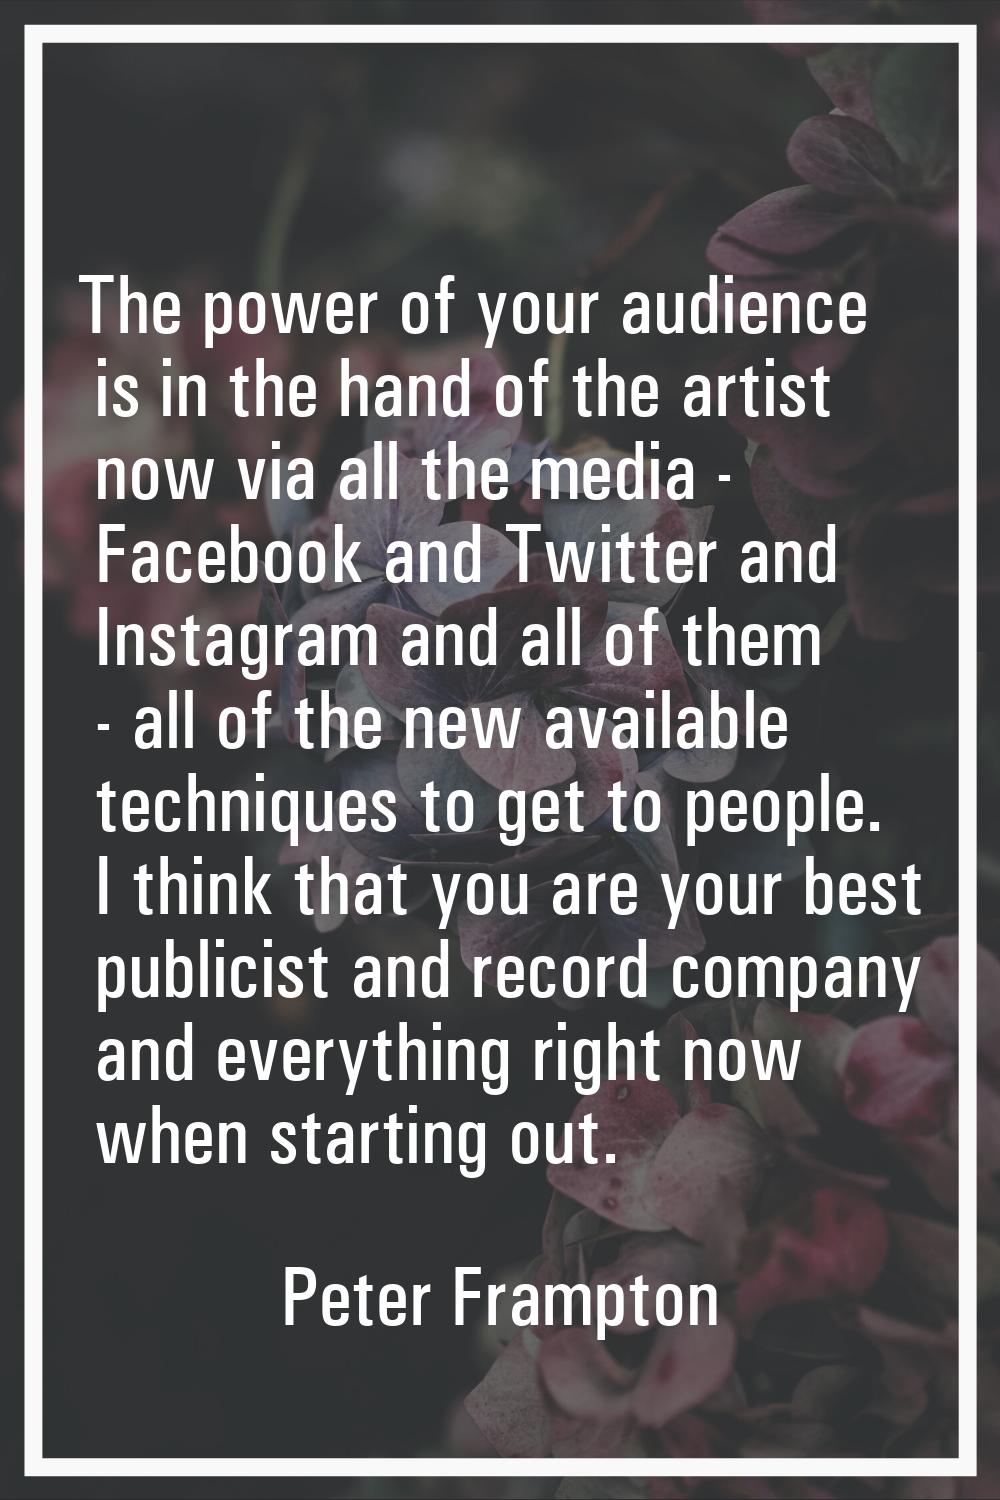 The power of your audience is in the hand of the artist now via all the media - Facebook and Twitte